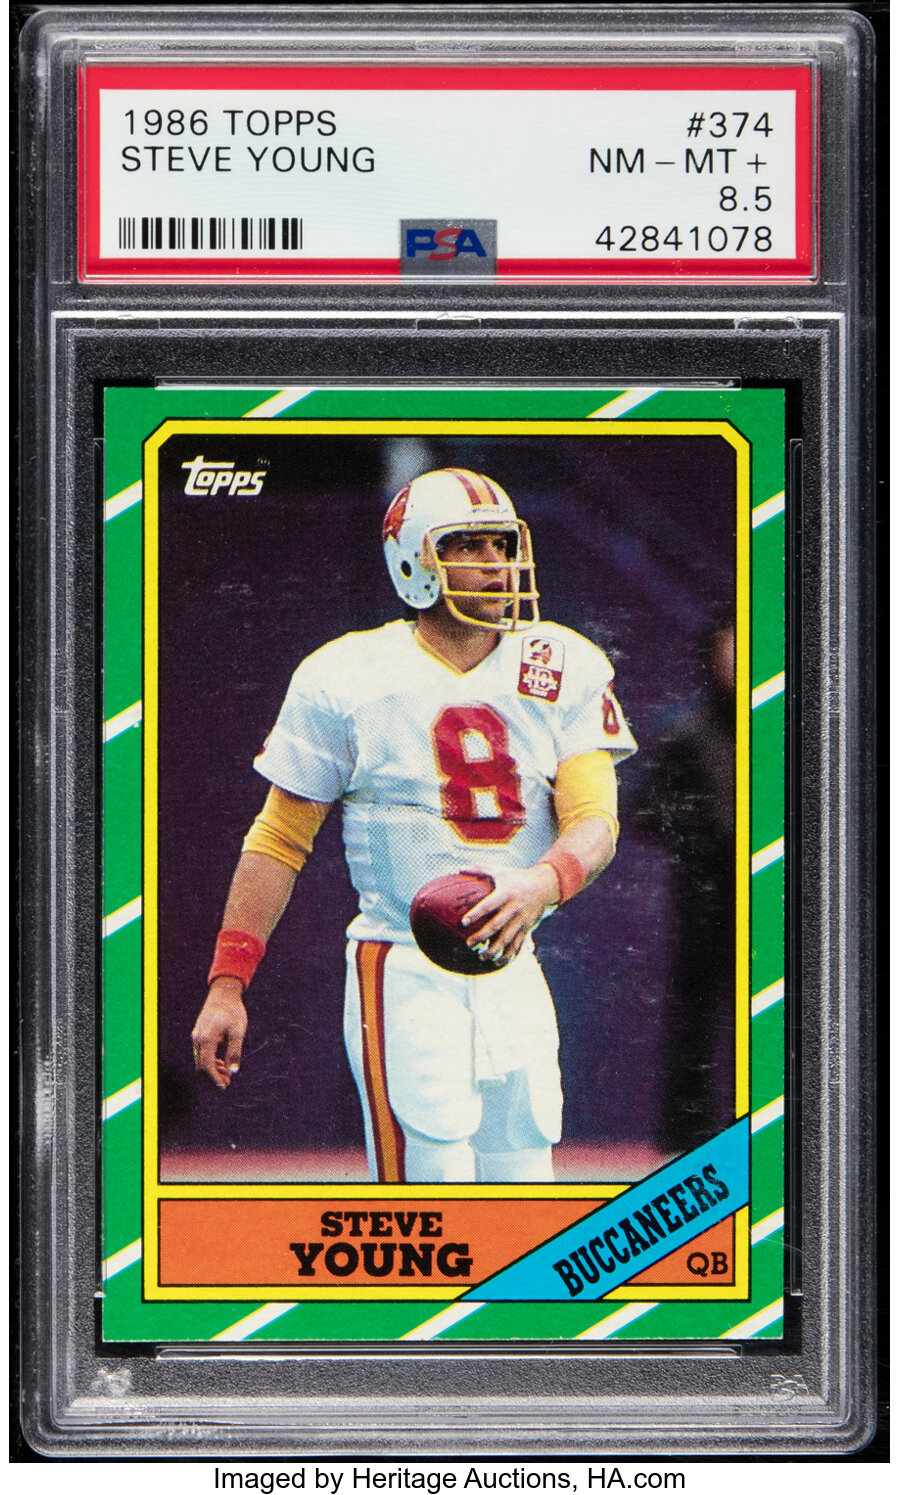 1986 Topps Steve Young #374 PSA NM-MT+ 8.5